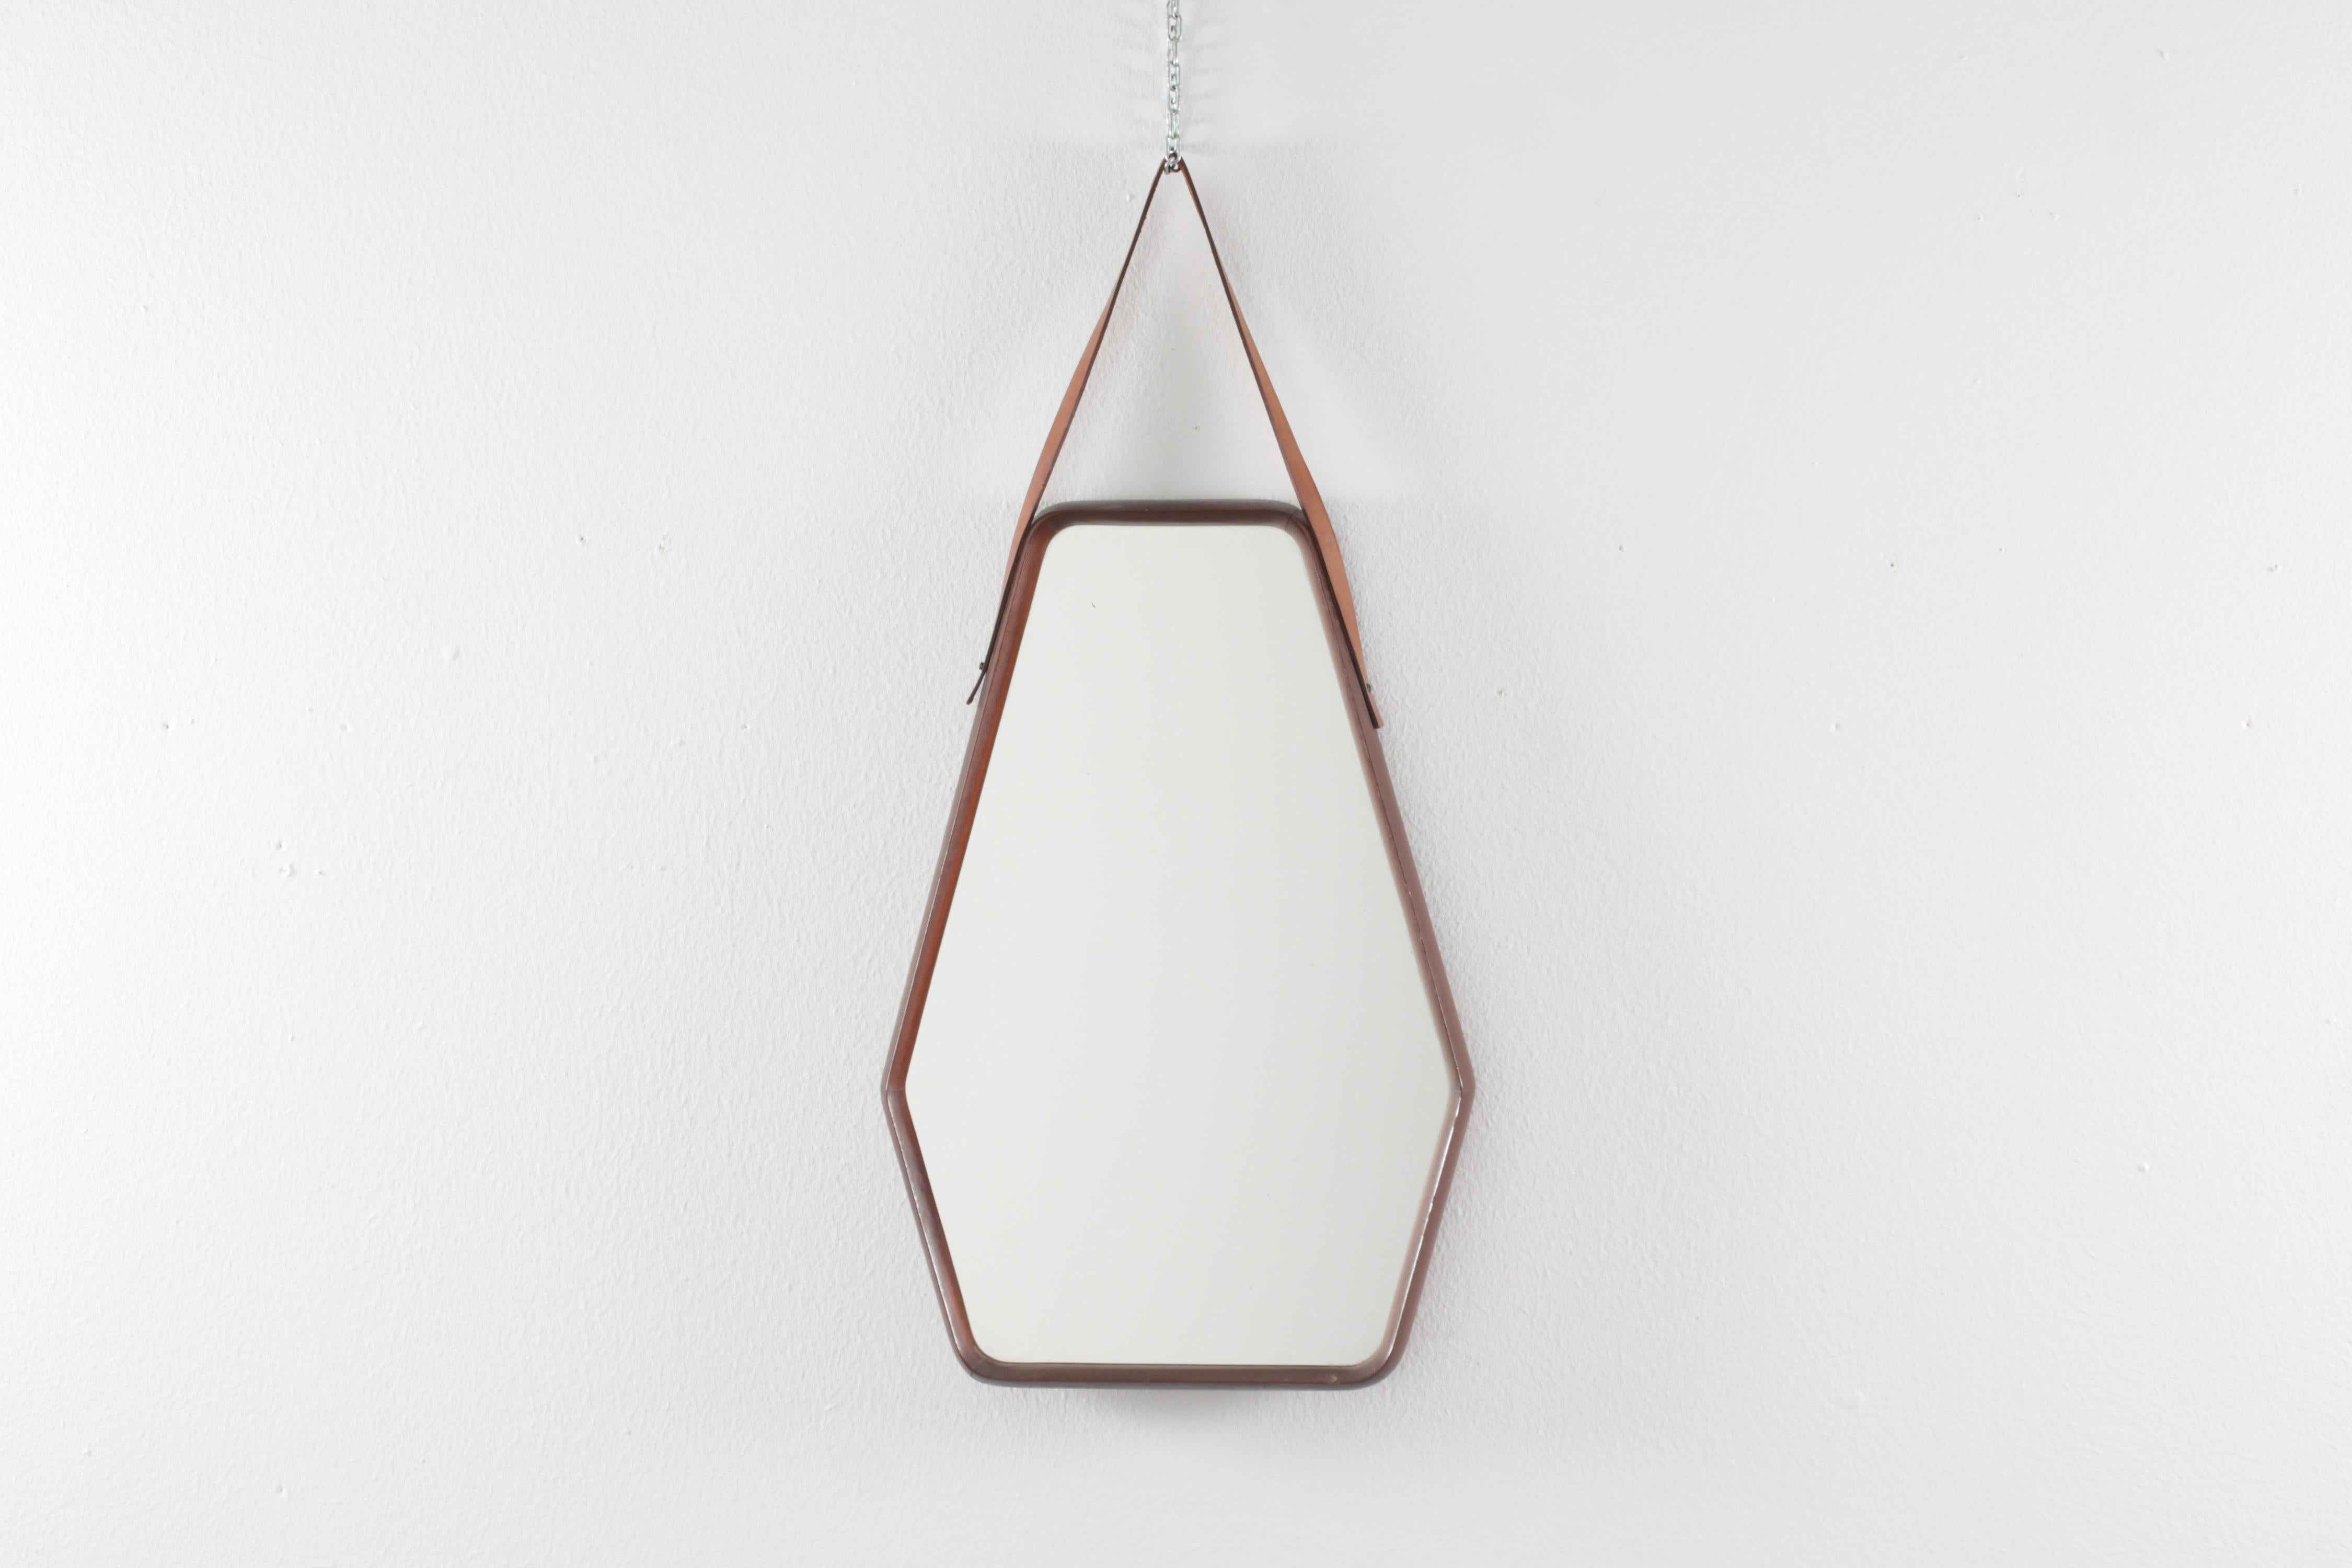 Very original wall mirror with a geometric shape with a thick curved wooden frame and leather band for hanging. Italian production from the 1960s
Wear consistent with age and use.